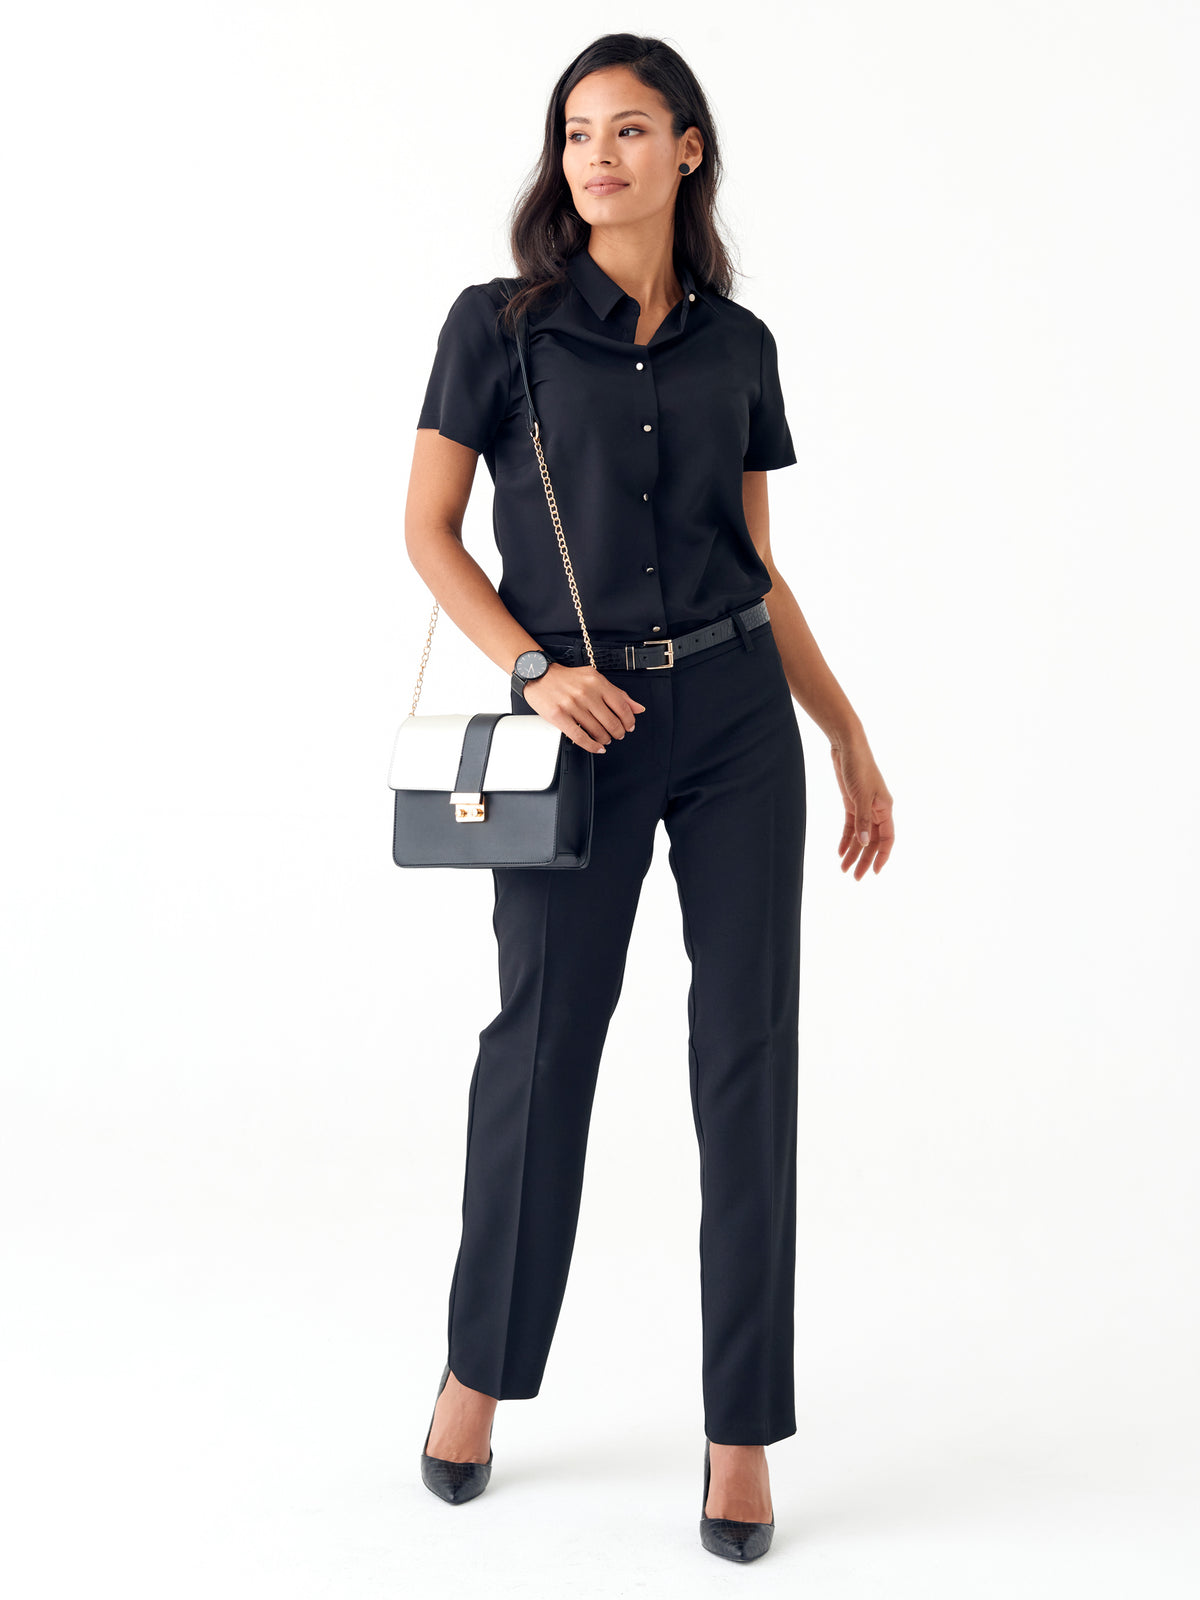 Carrie classic buttoned shirt - black